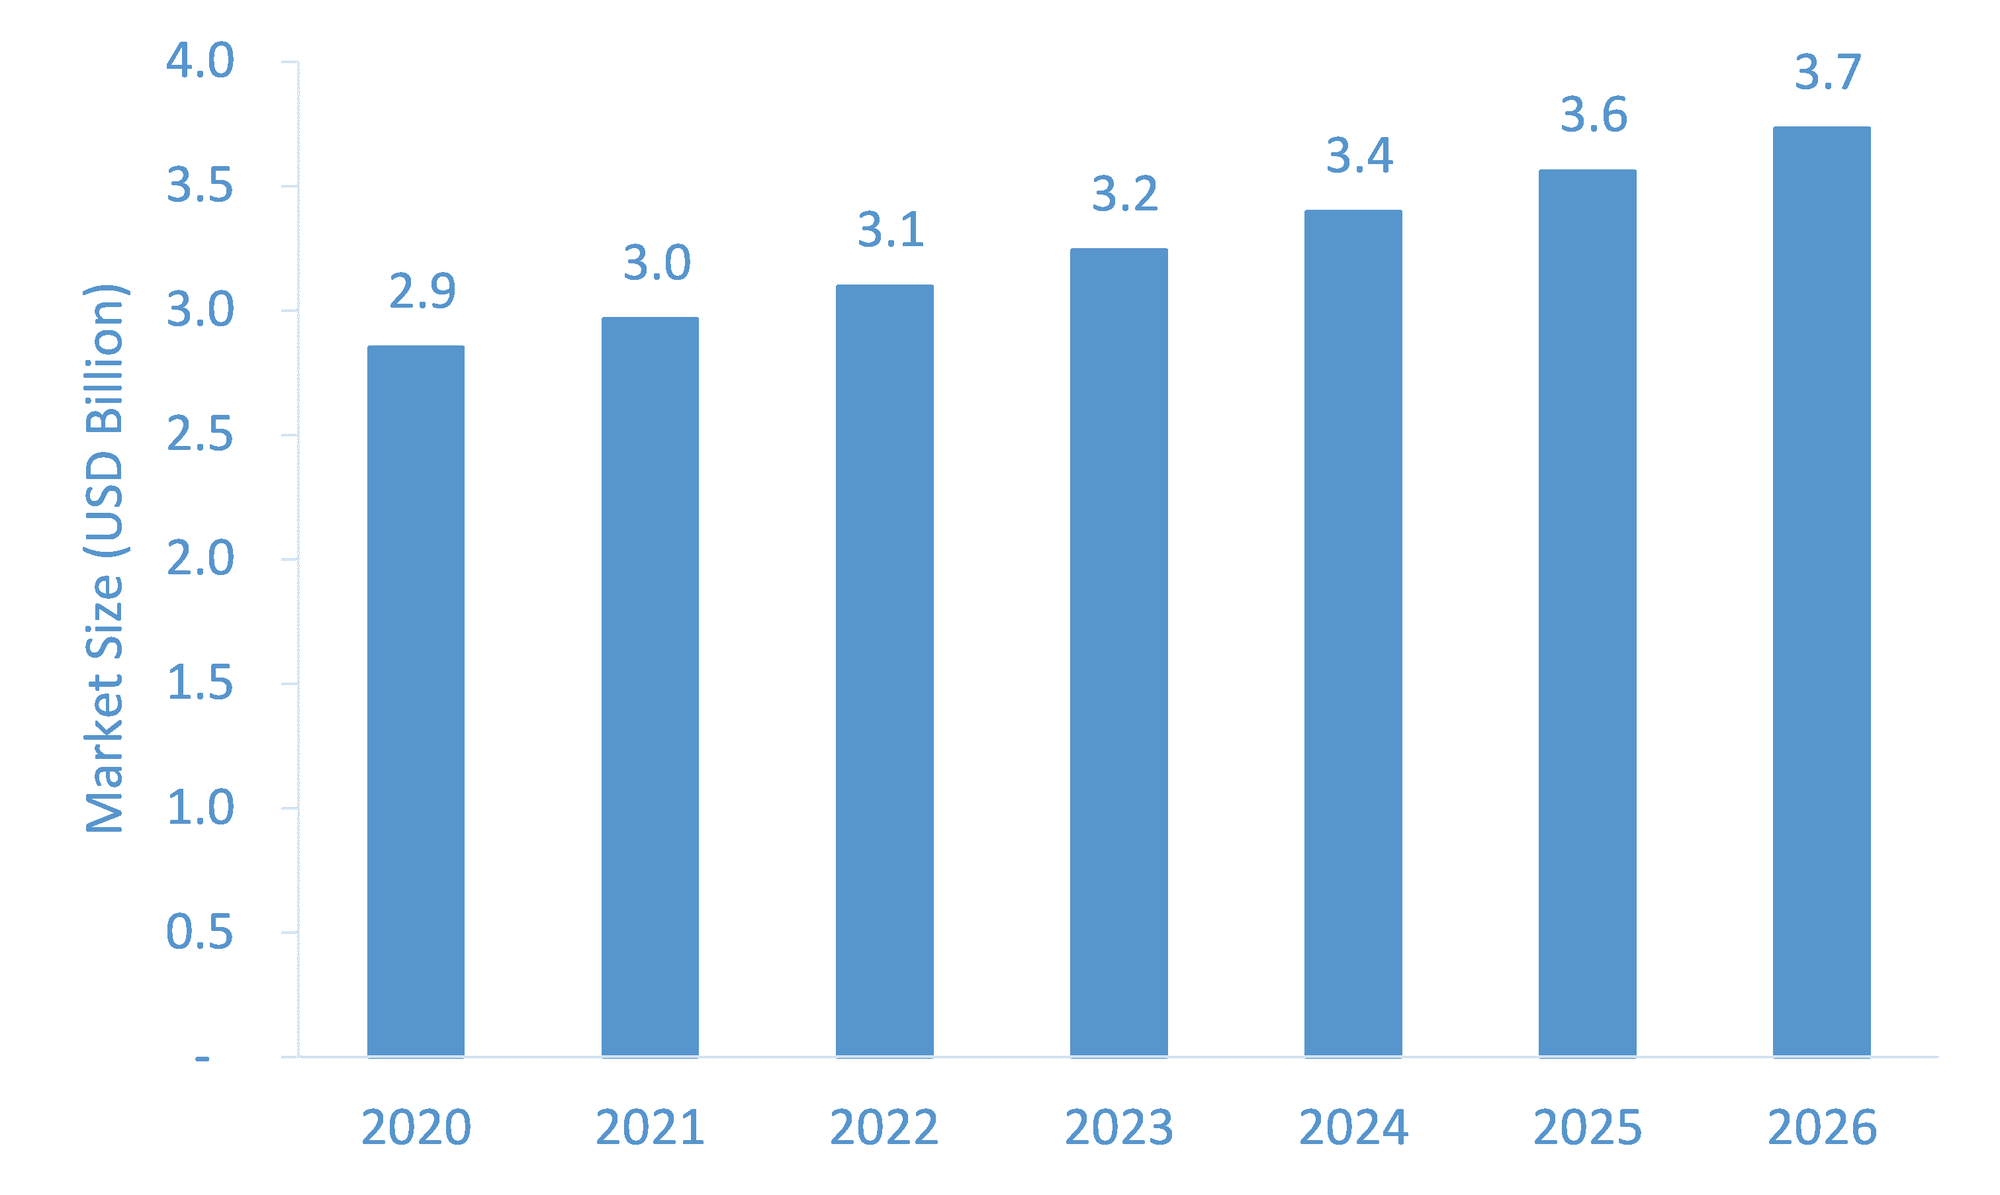 Proton Pump Inhibitors (PPIs) Market is Anticipated to Grow at an Impressive CAGR